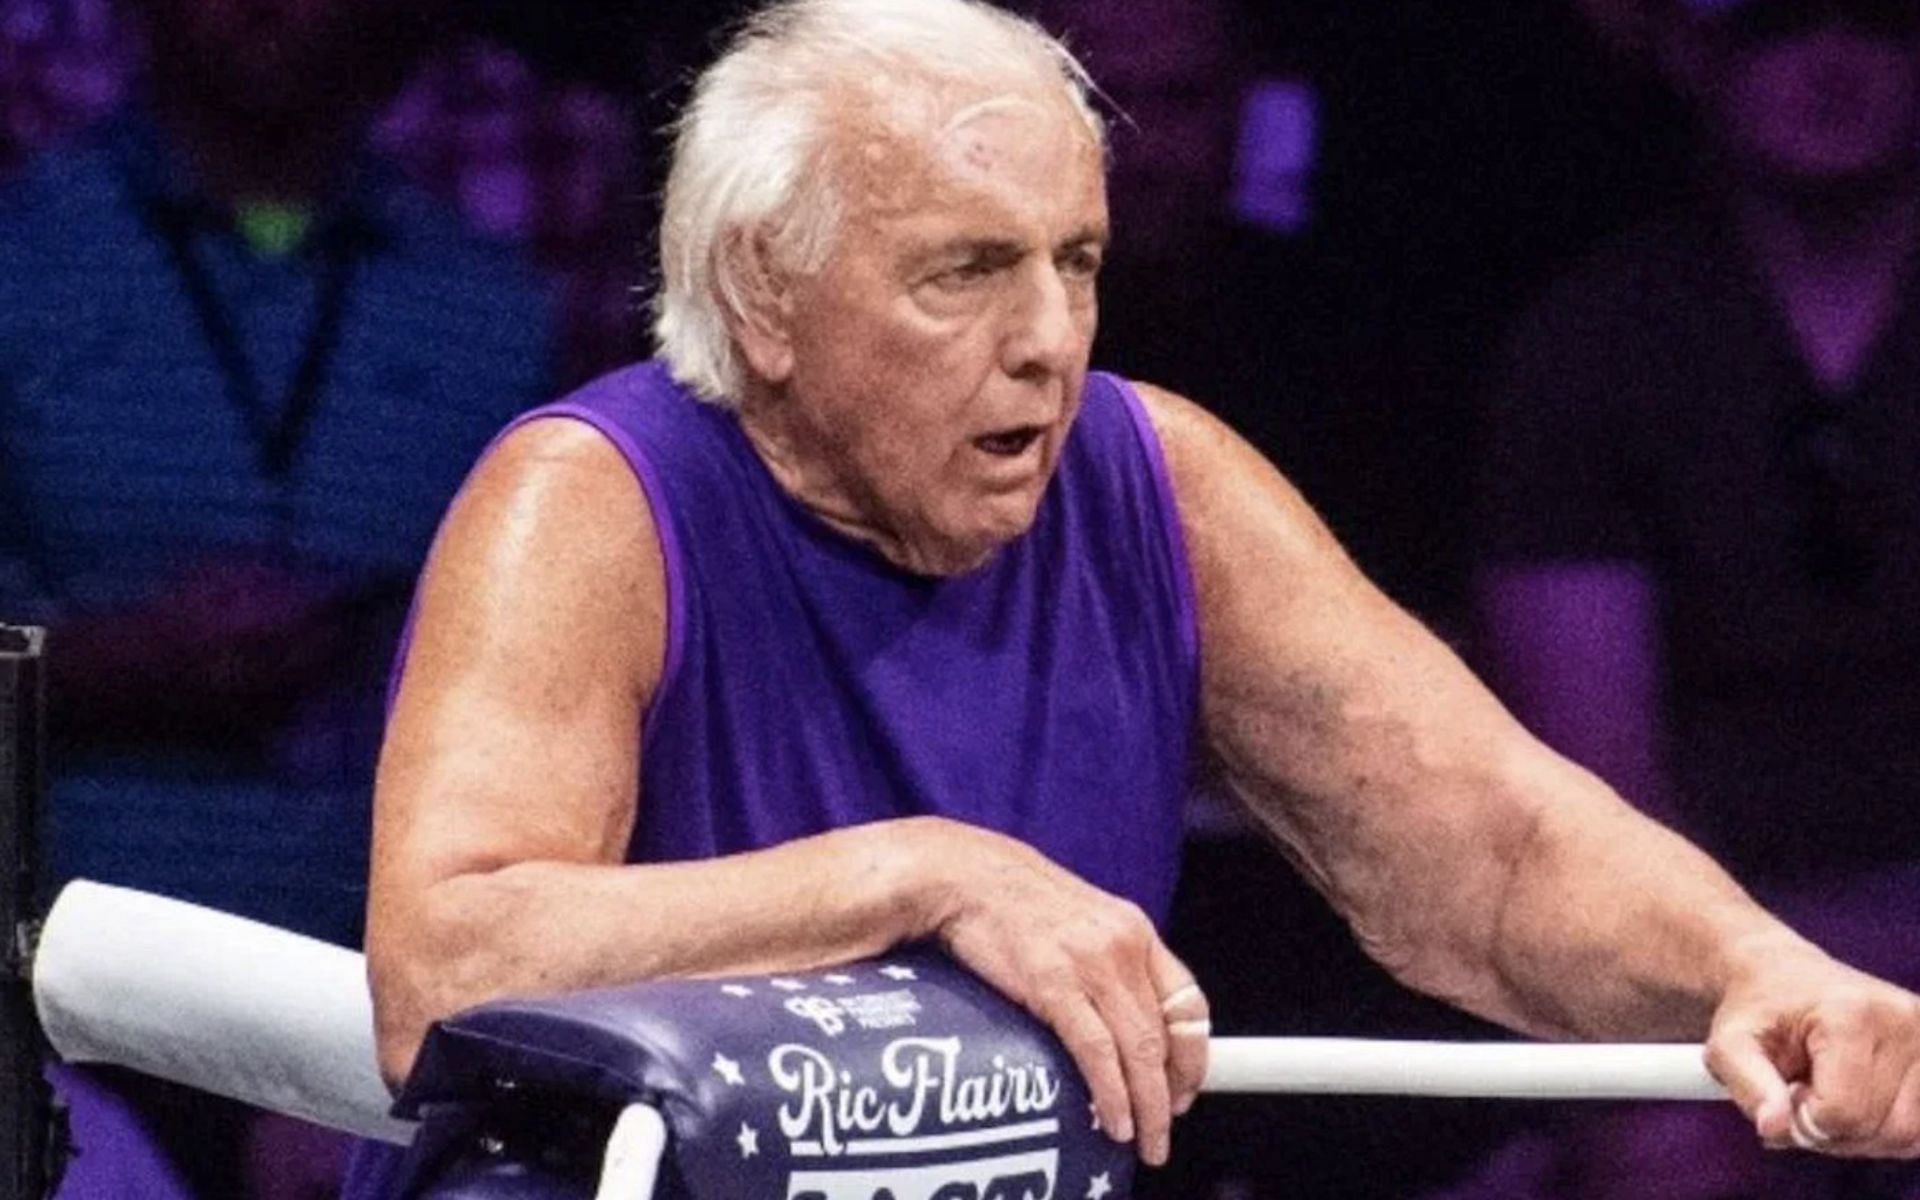 WWE Hall of Famer, &quot;The Nature Boy&quot; Ric Flair